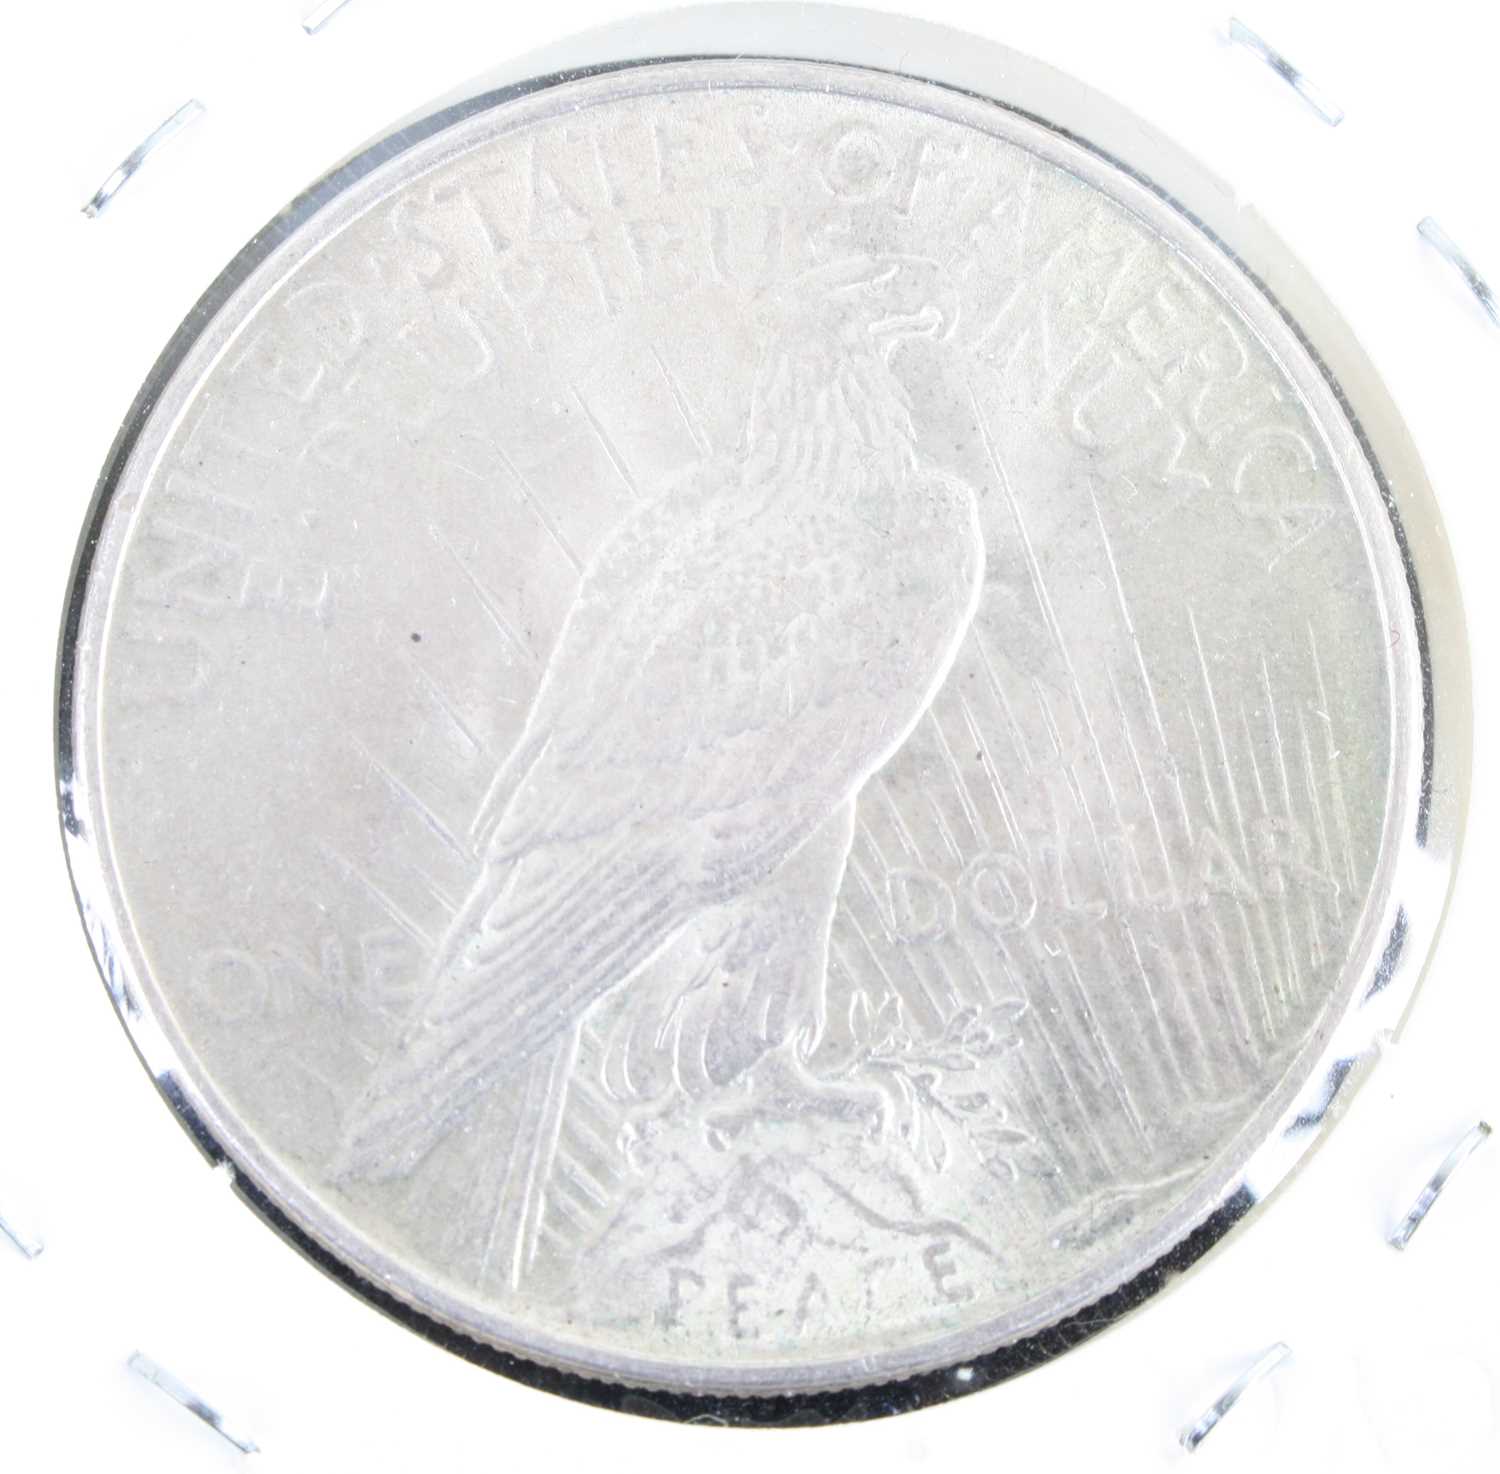 United States of America, 1922 Peace dollar, obv: Liberty bust left above date, rev: eagle - Image 4 of 4